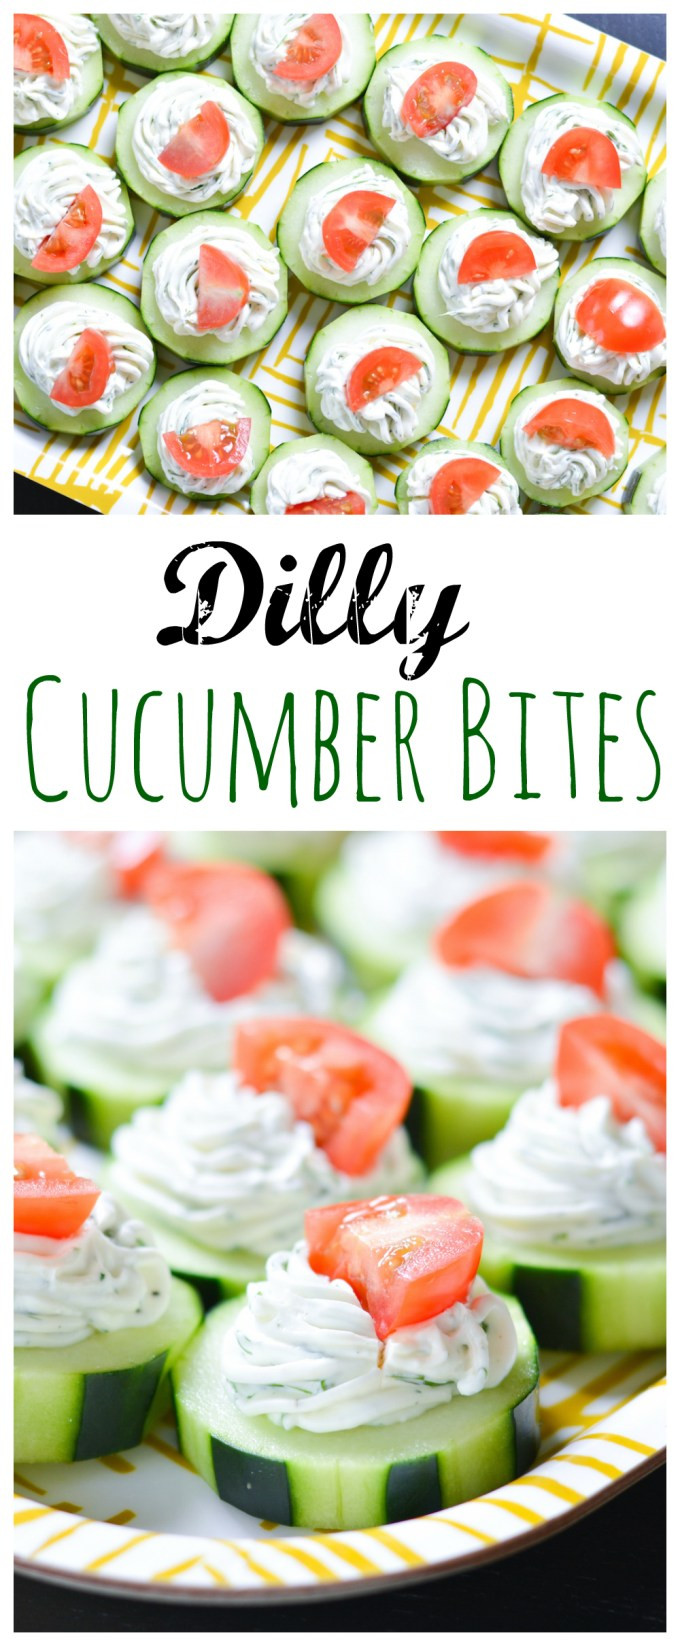 Cucumber Appetizers With Dill And Cream Cheese
 Dilly Cucumber Bites